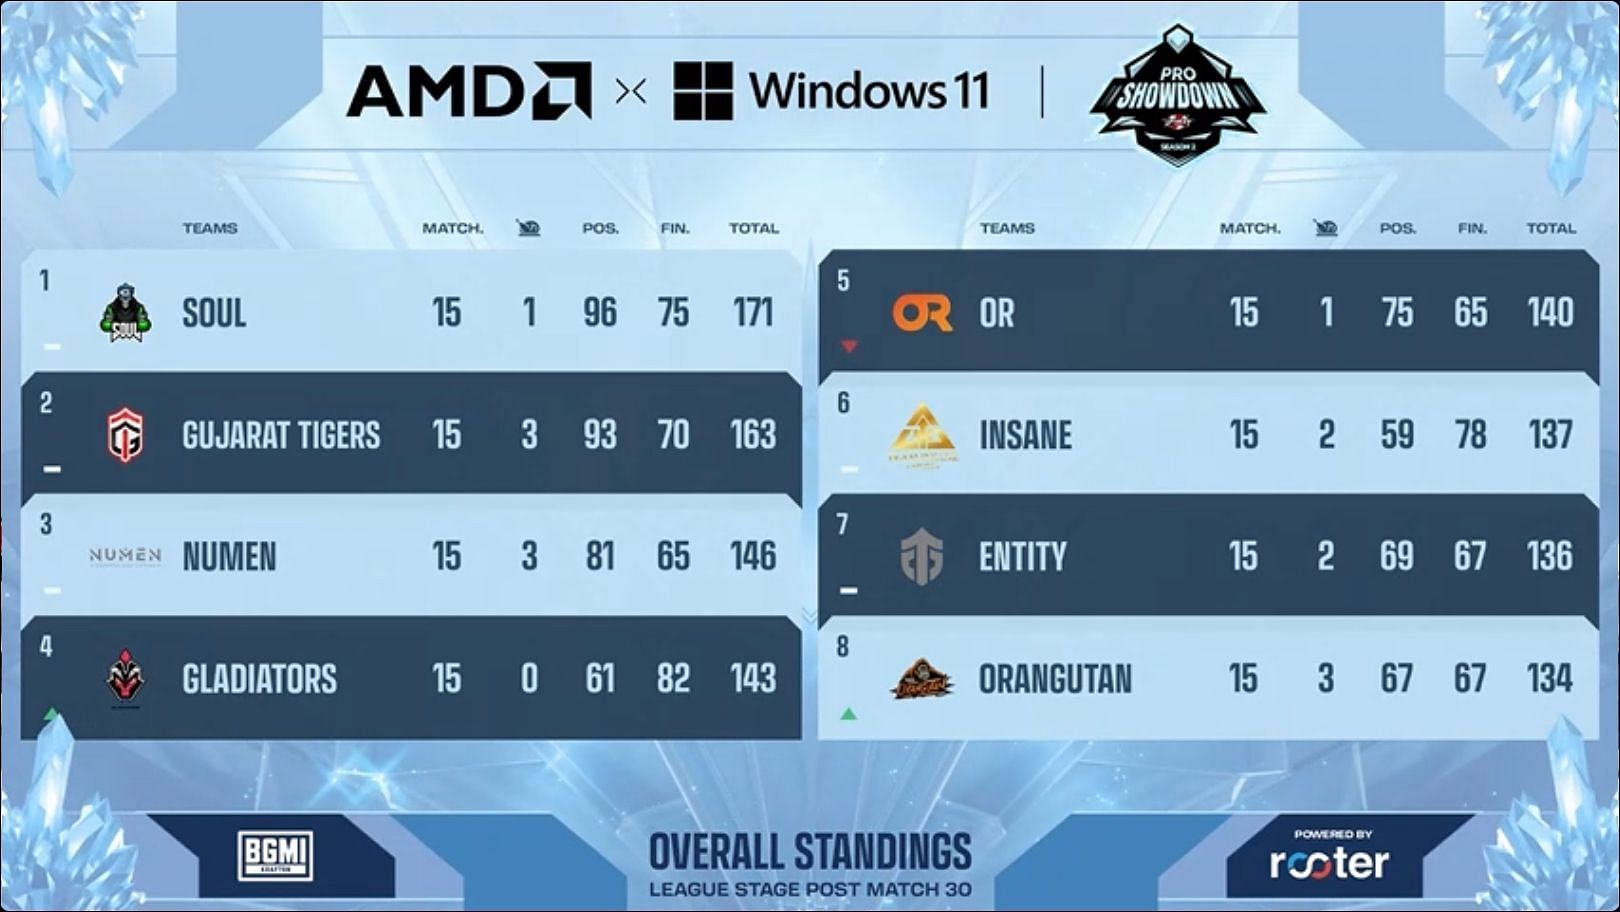 Gladiators Esports ended up in fourth place after Day 5 of the BGMI Pro Showdown Season 2 (Image via Upthrust)